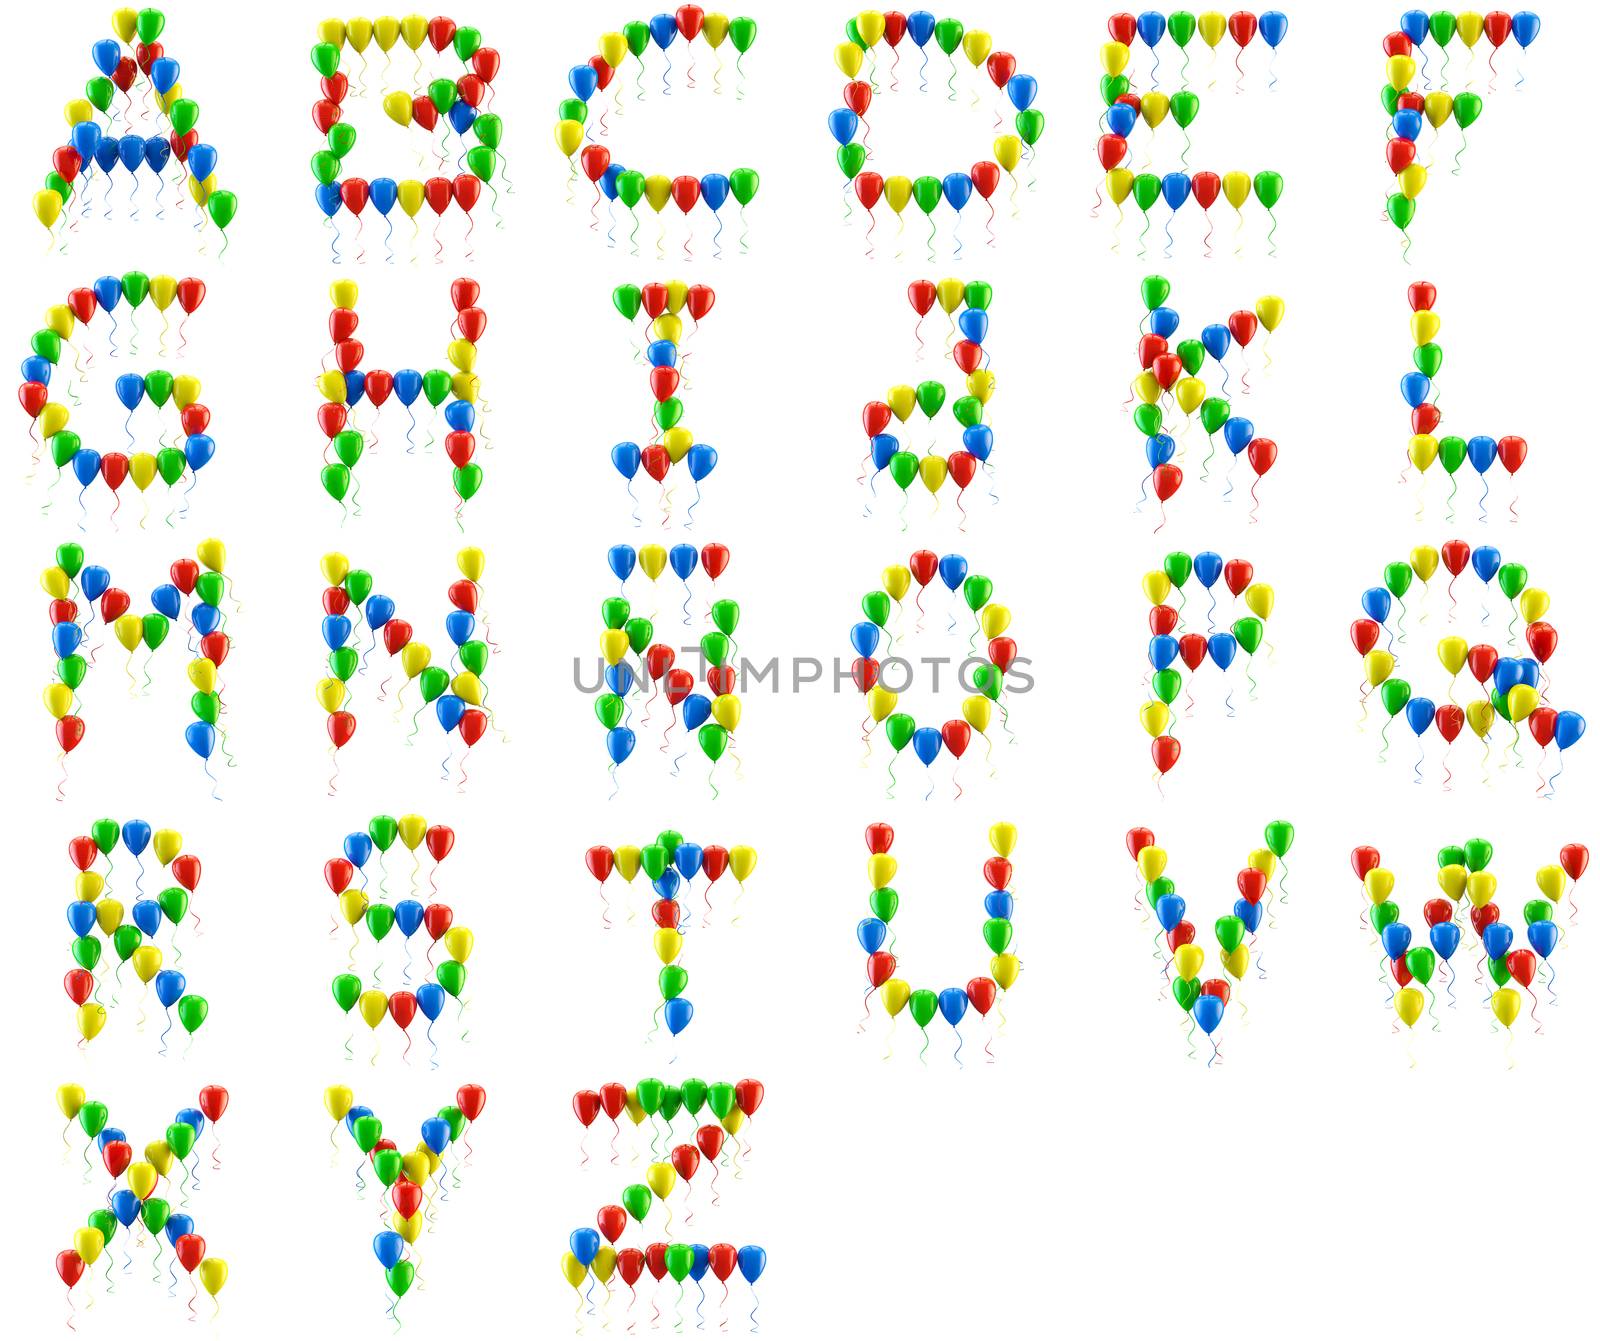 3D rendering.Funny balloons alphabet for birthday party and celebrations